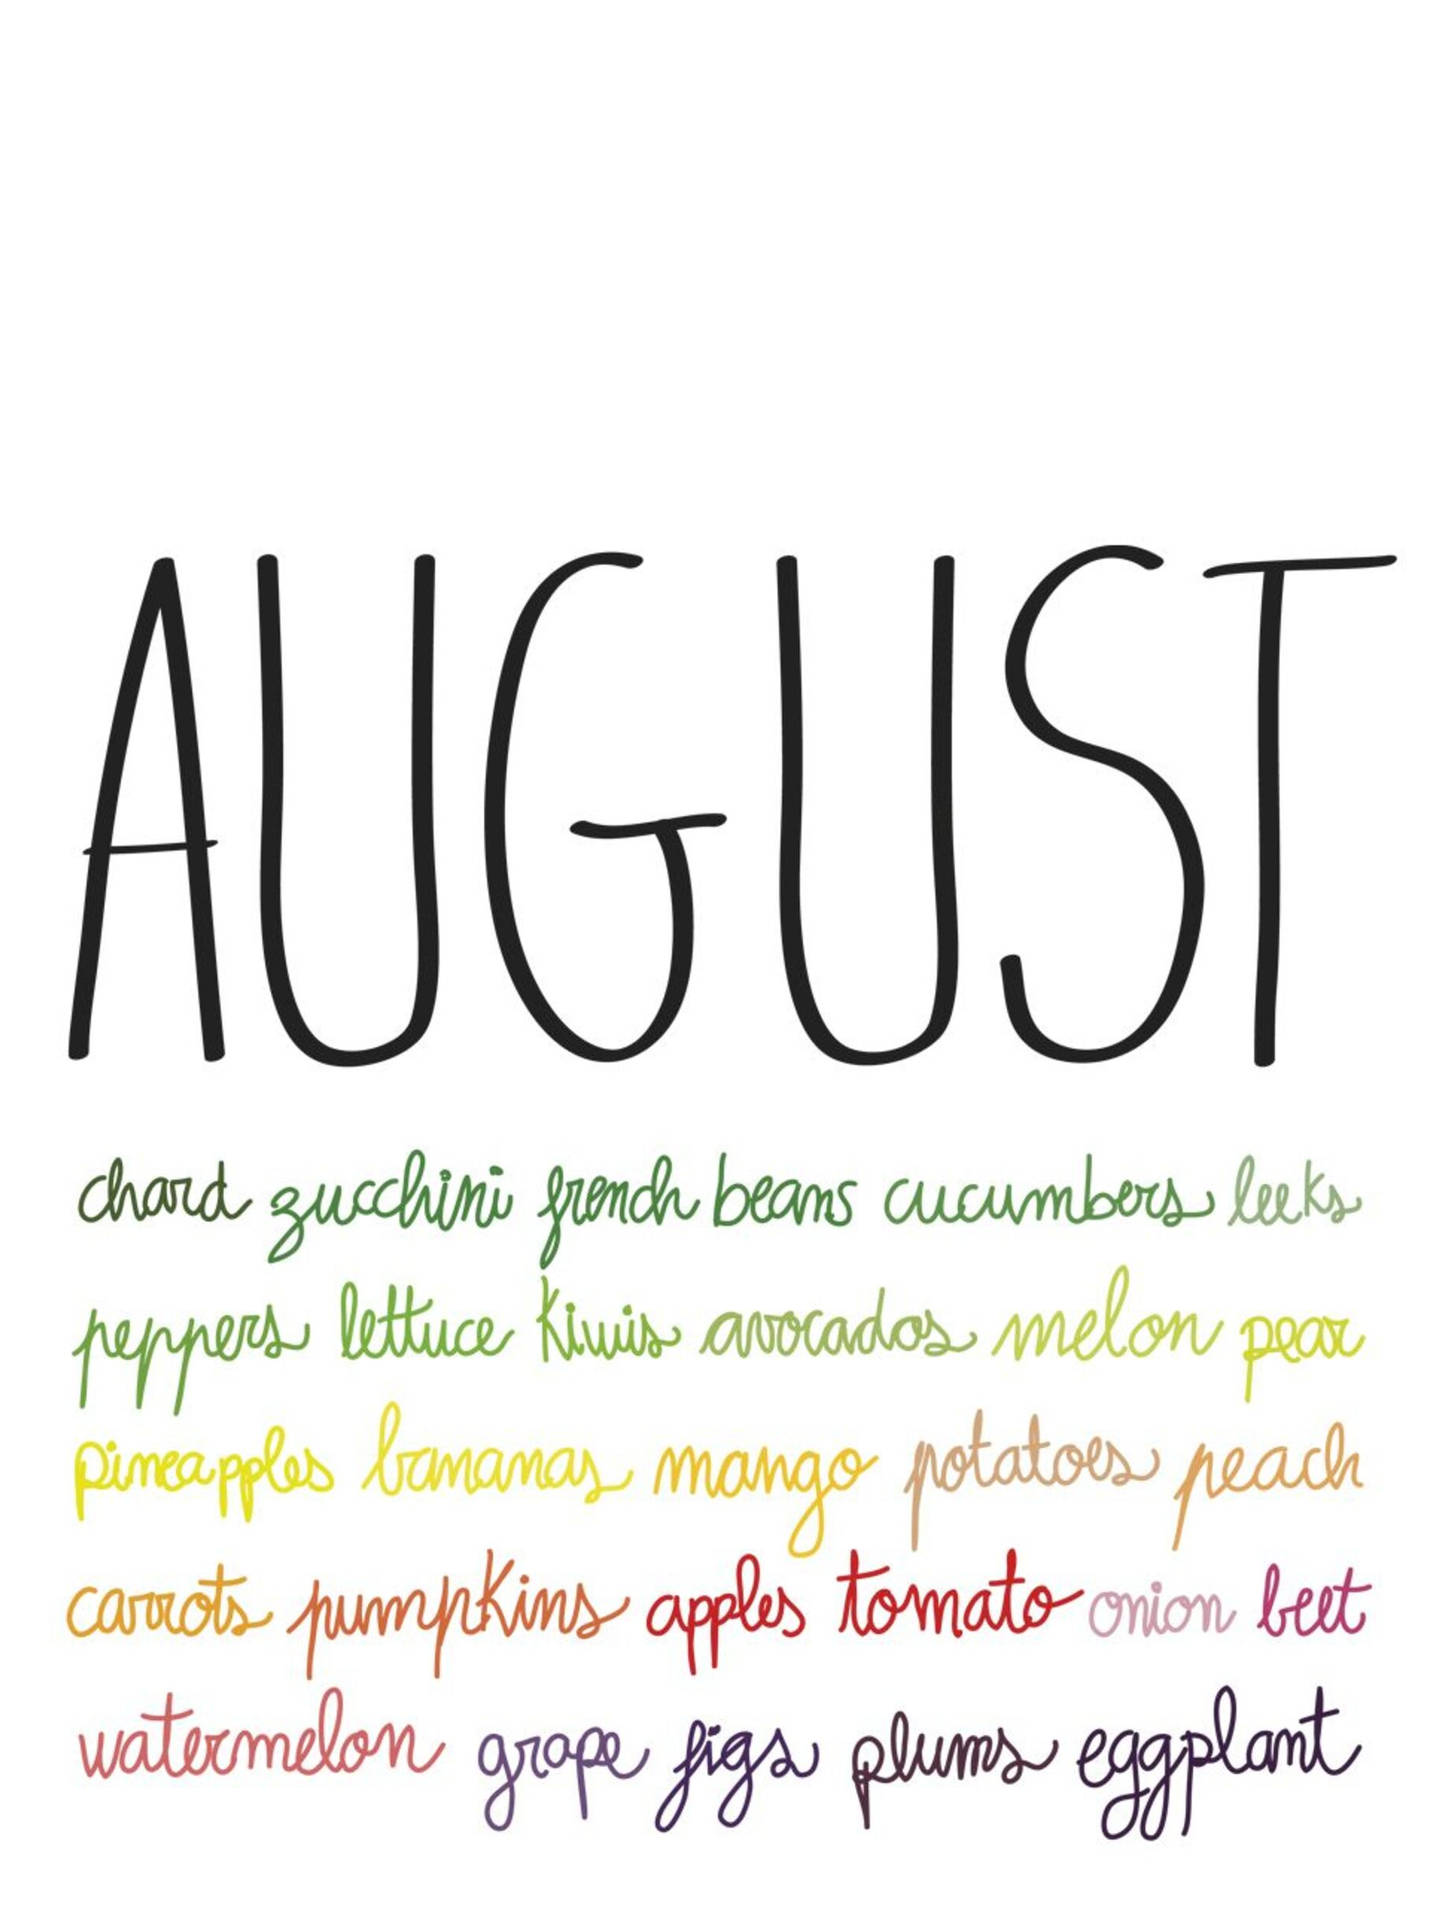 Celebrate the colors of August! Wallpaper